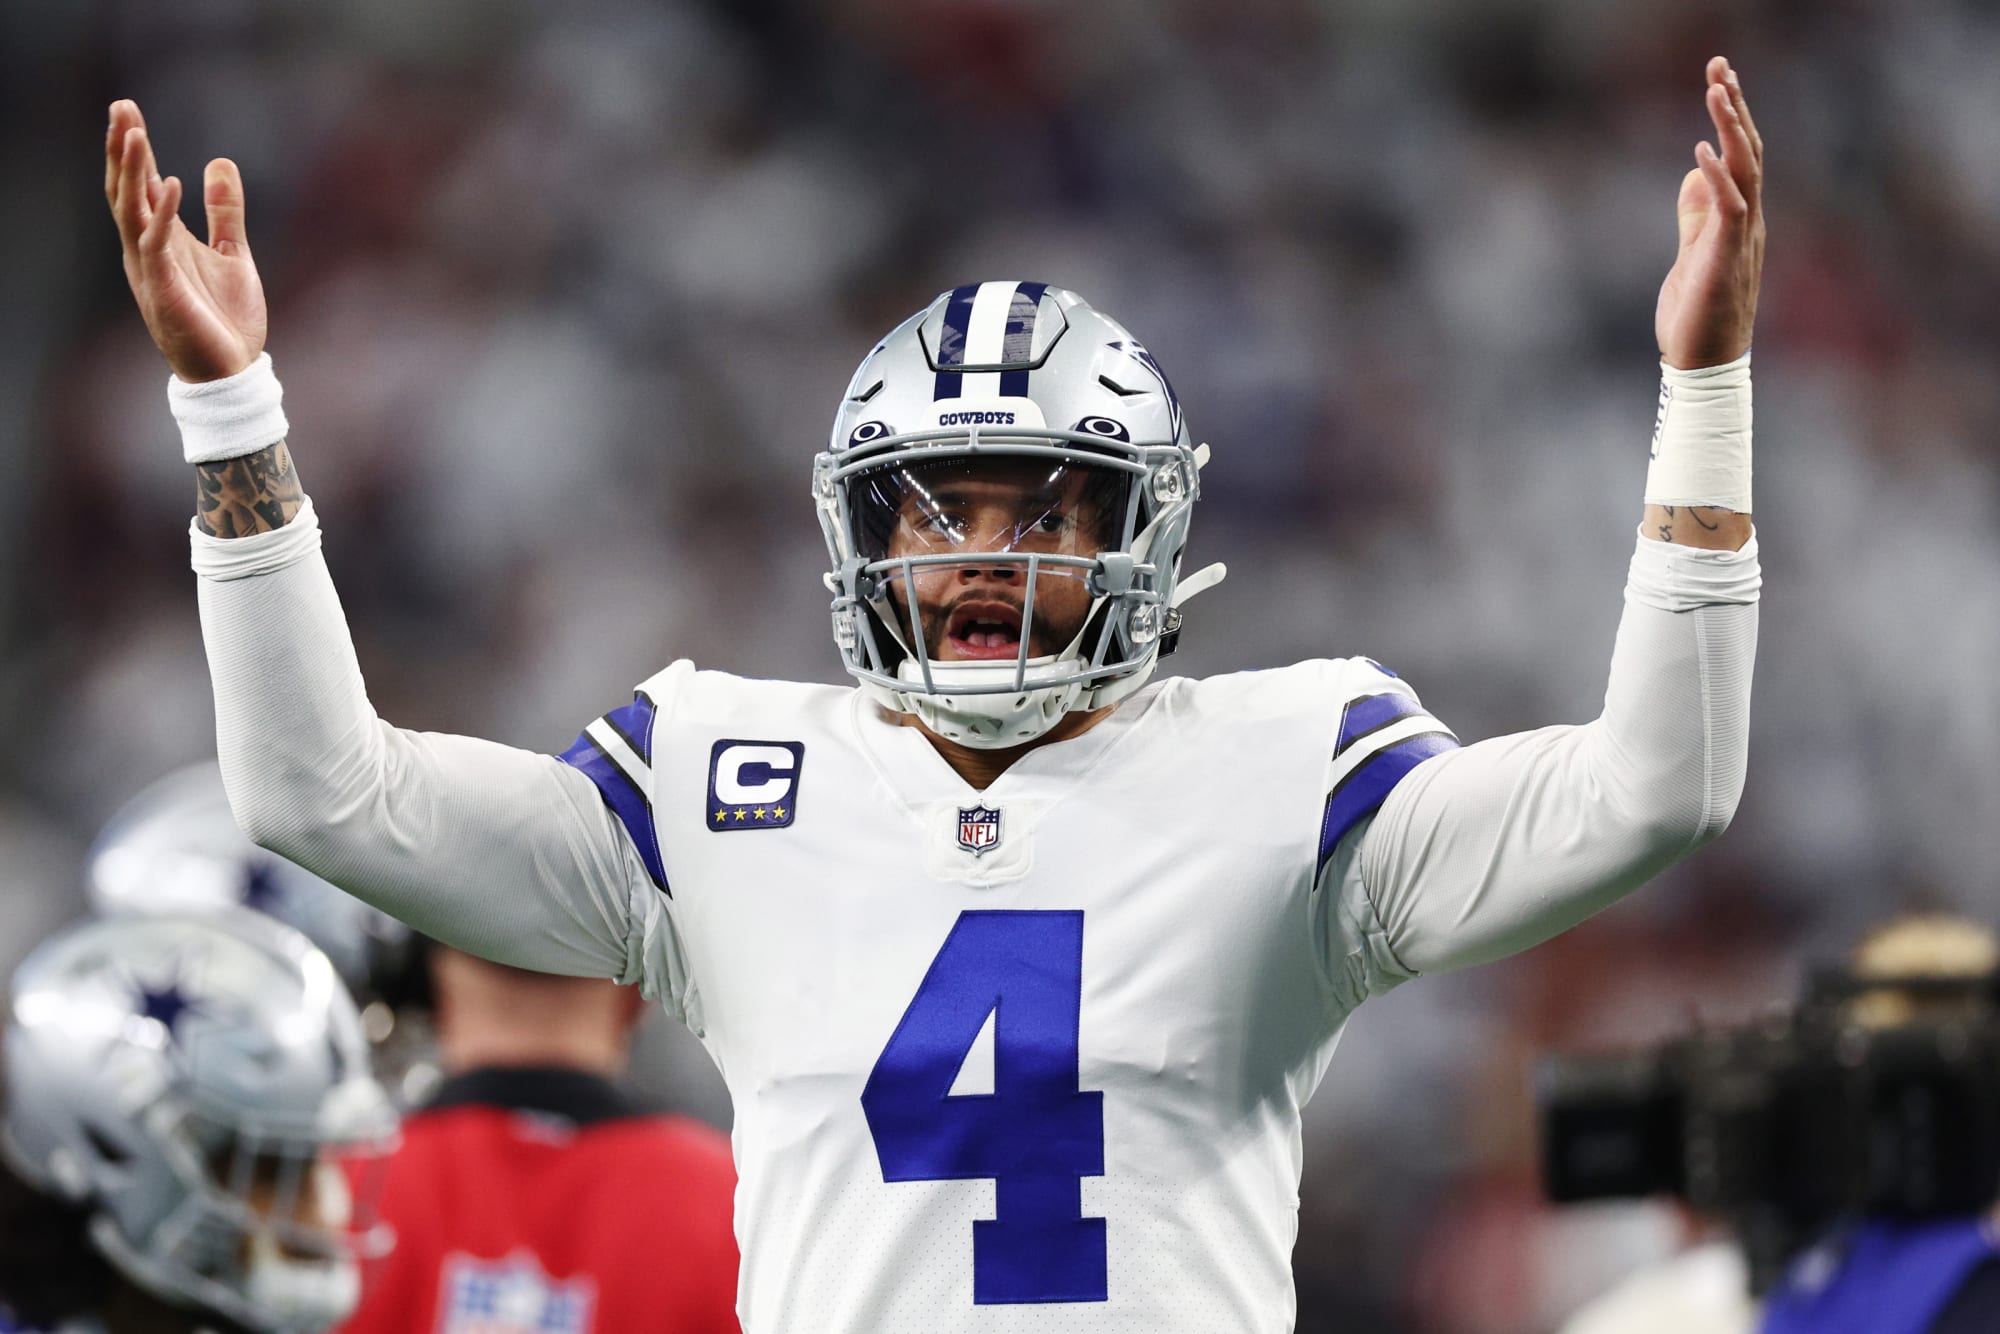 Cowboys fans should be infuriated with analyst’s overrated players ranking